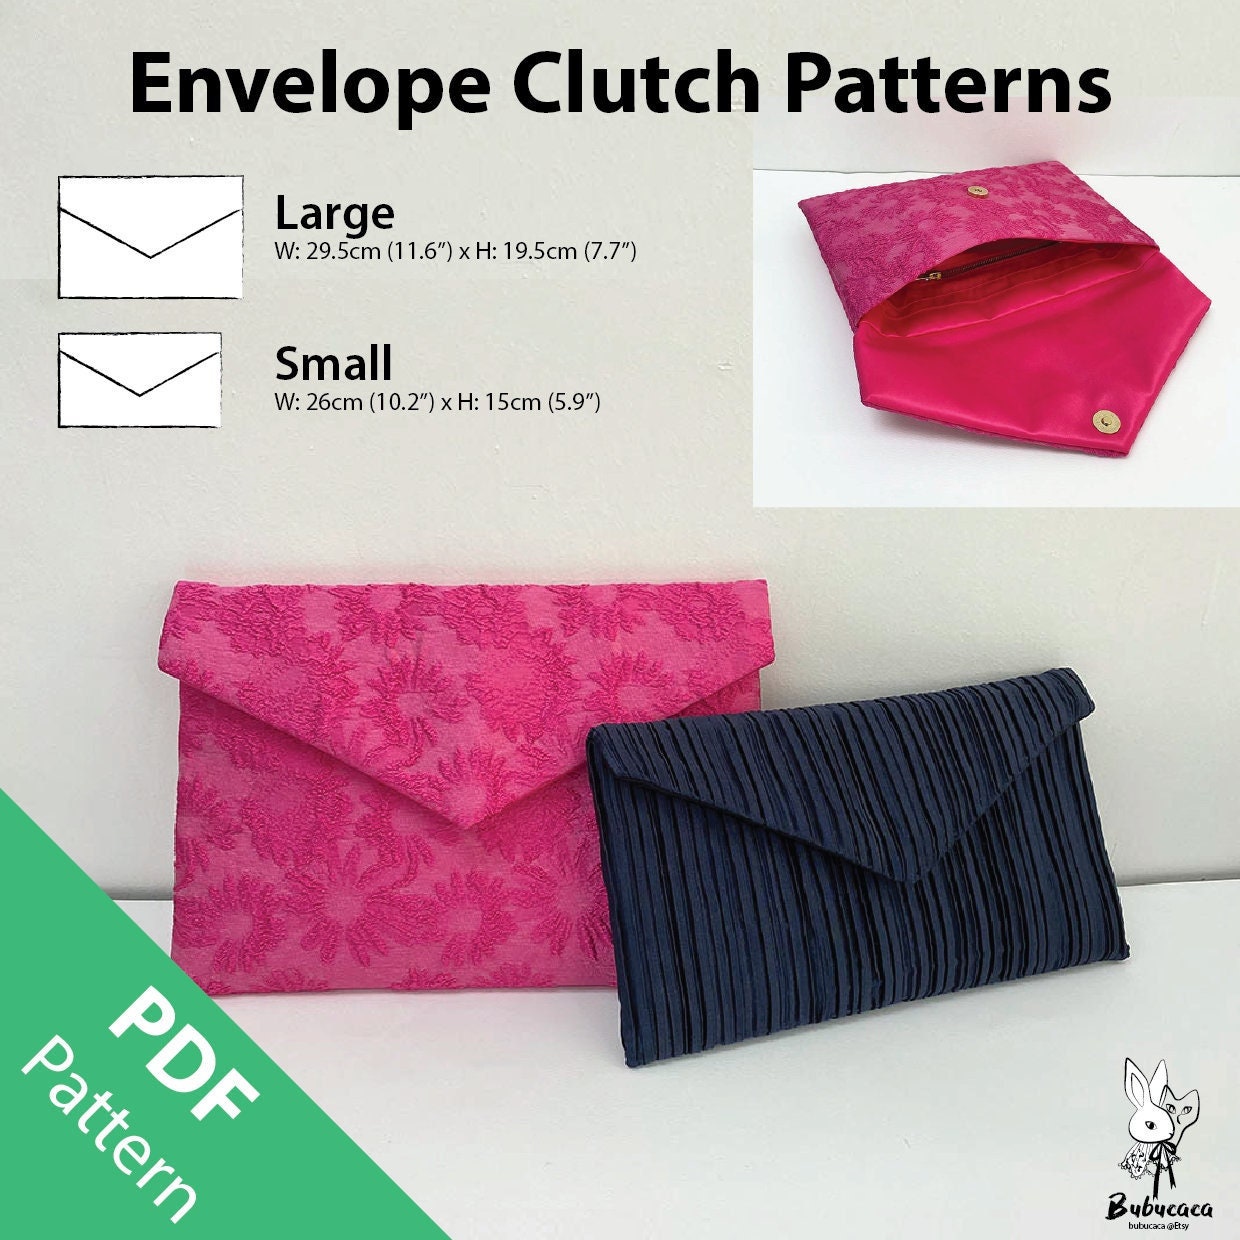 Sew Simple Bags – Learn to sew with these simple and easy bag sewing  patterns